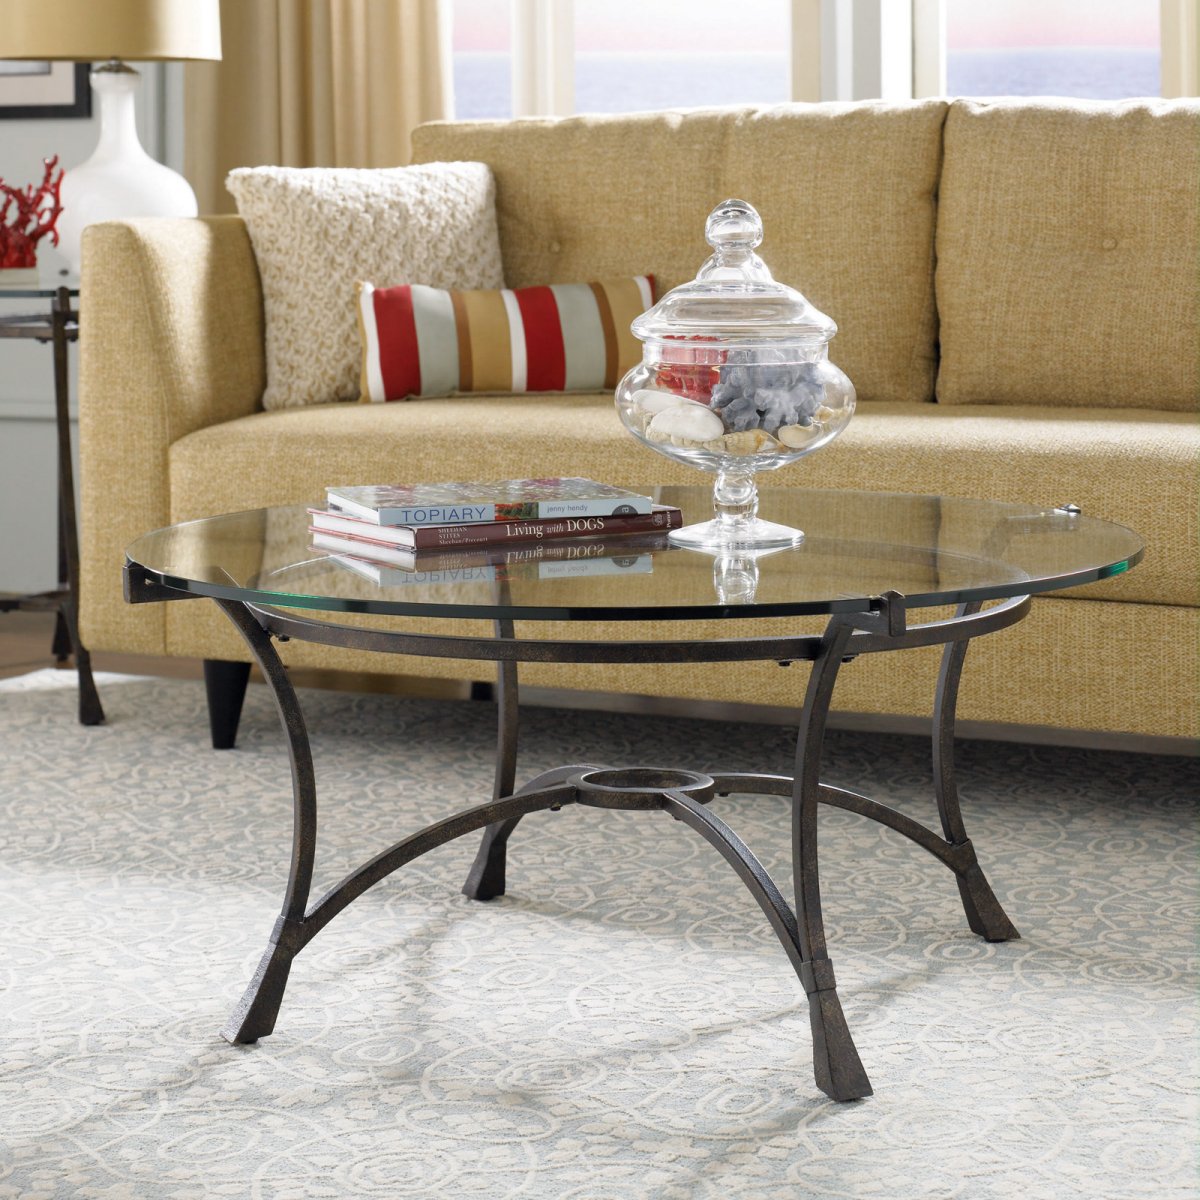 glass coffee tables that bring transparency your living room table with metal legs daring piece feels both elegant and industrial accent ideas large sun umbrellas transitional